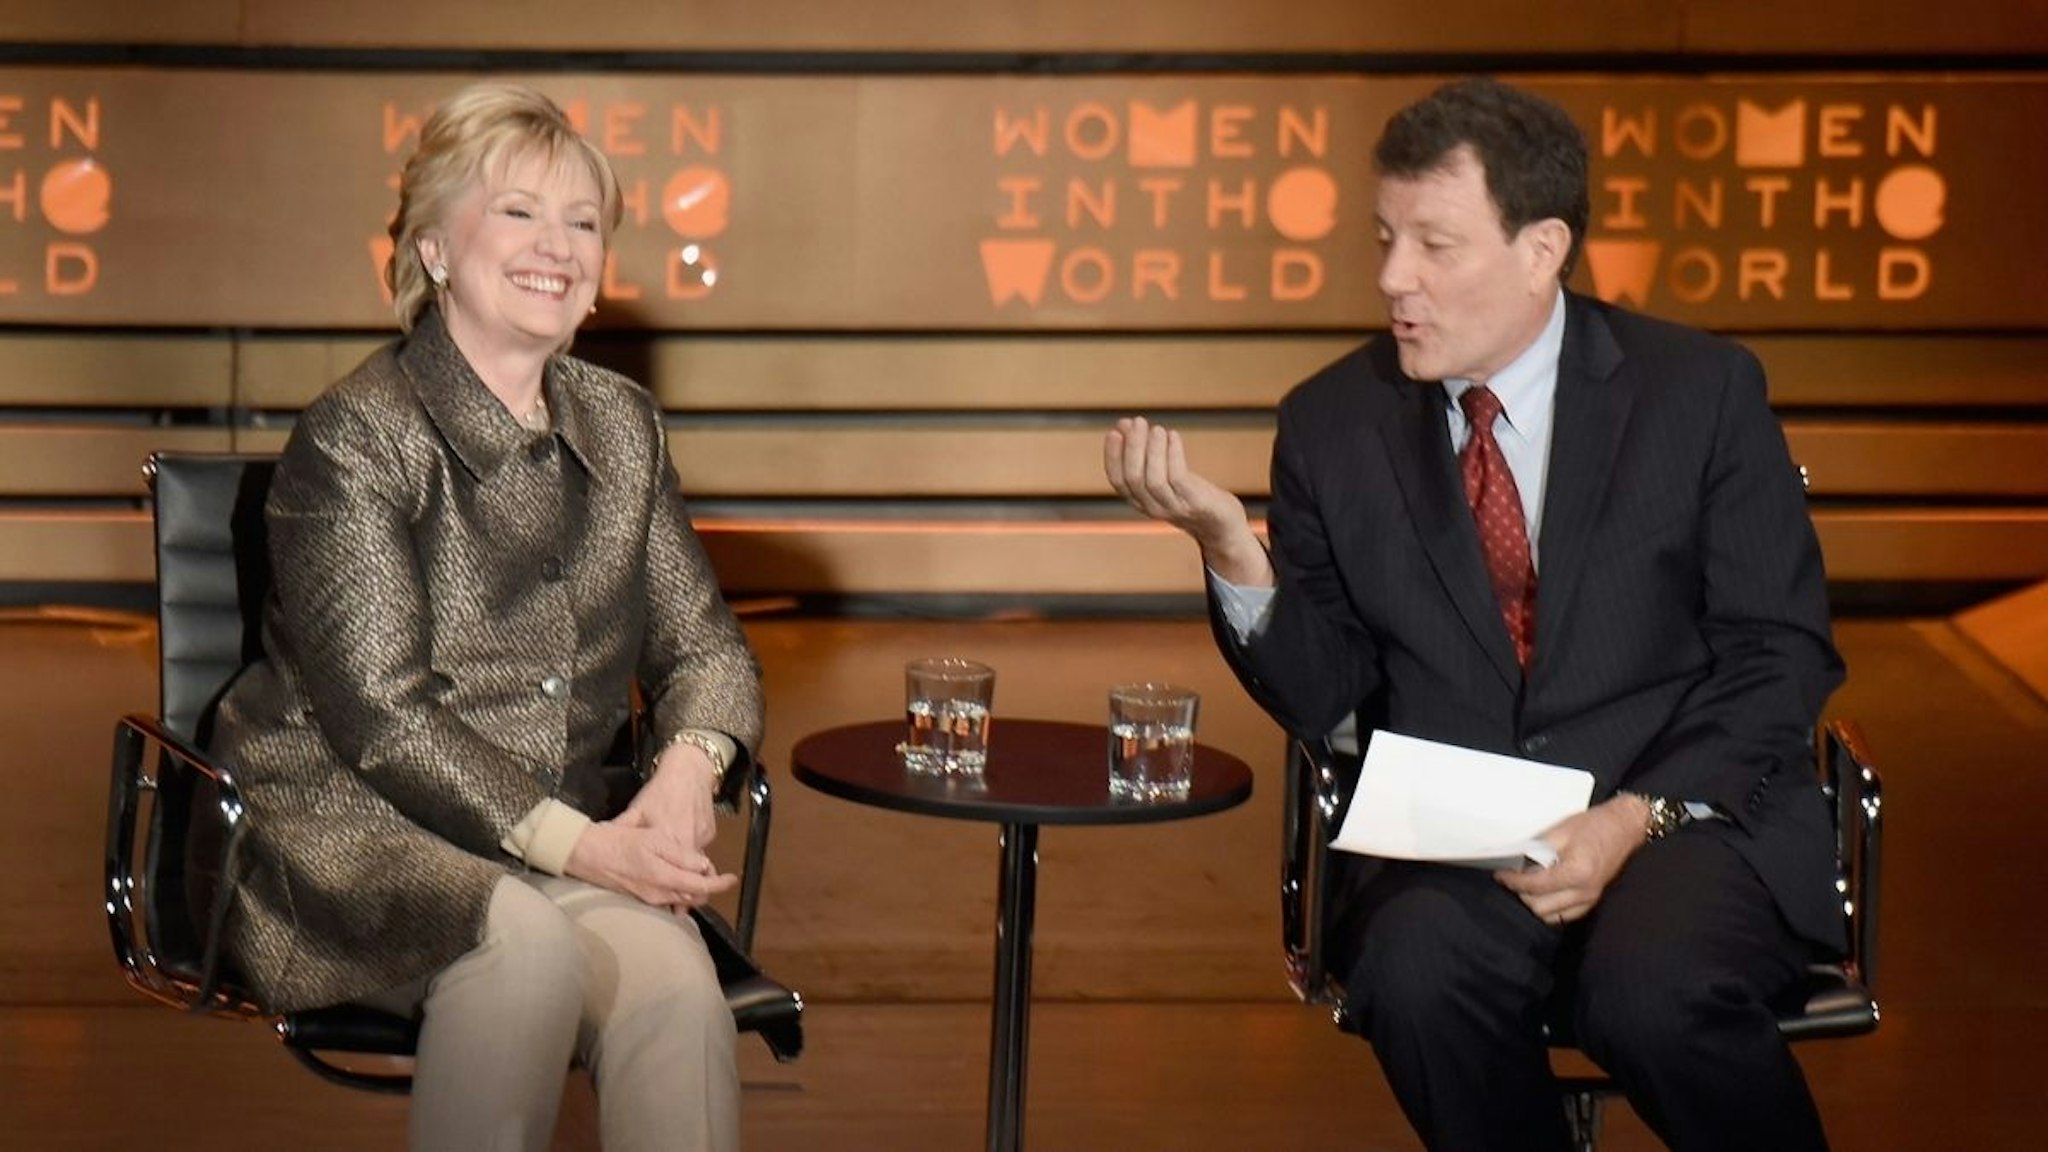 Former United States Secretary of State, Hillary Clinton and Journalist Nicholas Kristof speak during the Eighth Annual Women In The World Summit at Lincoln Center for the Performing Arts on April 6, 2017 in New York City.